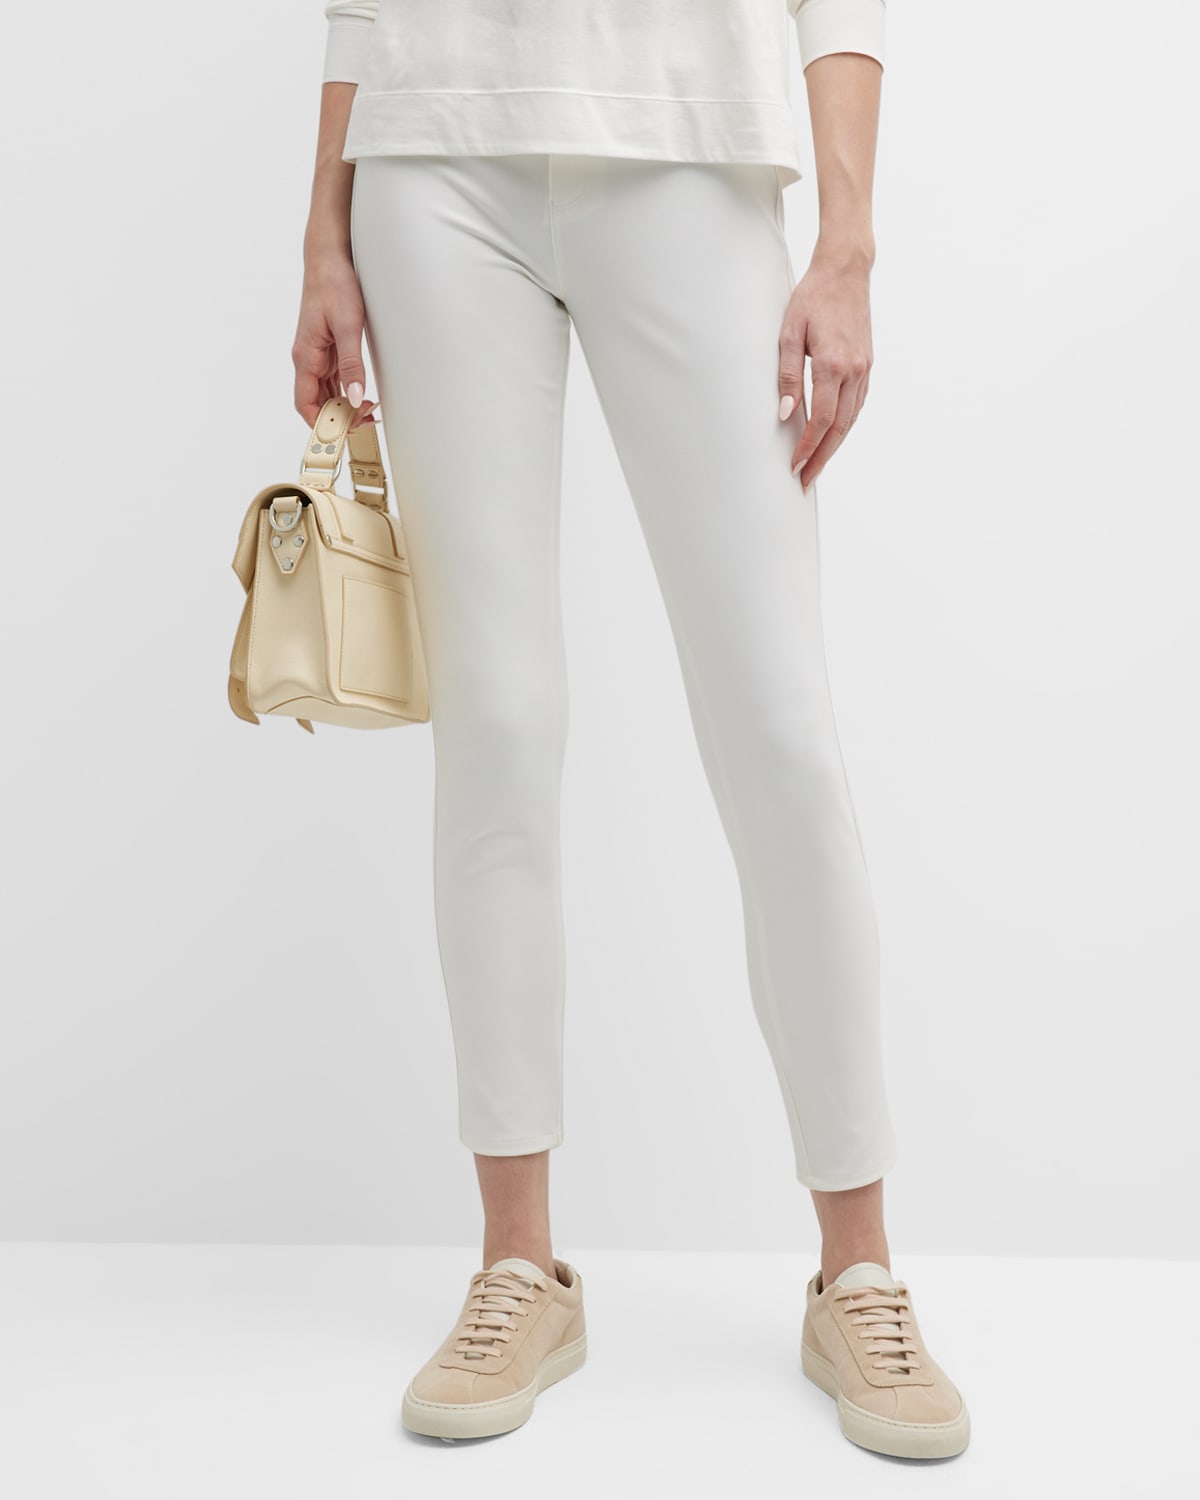 Lafayette 148 Plus Size Mercer Acclaimed Stretch Skinny Jeans In White